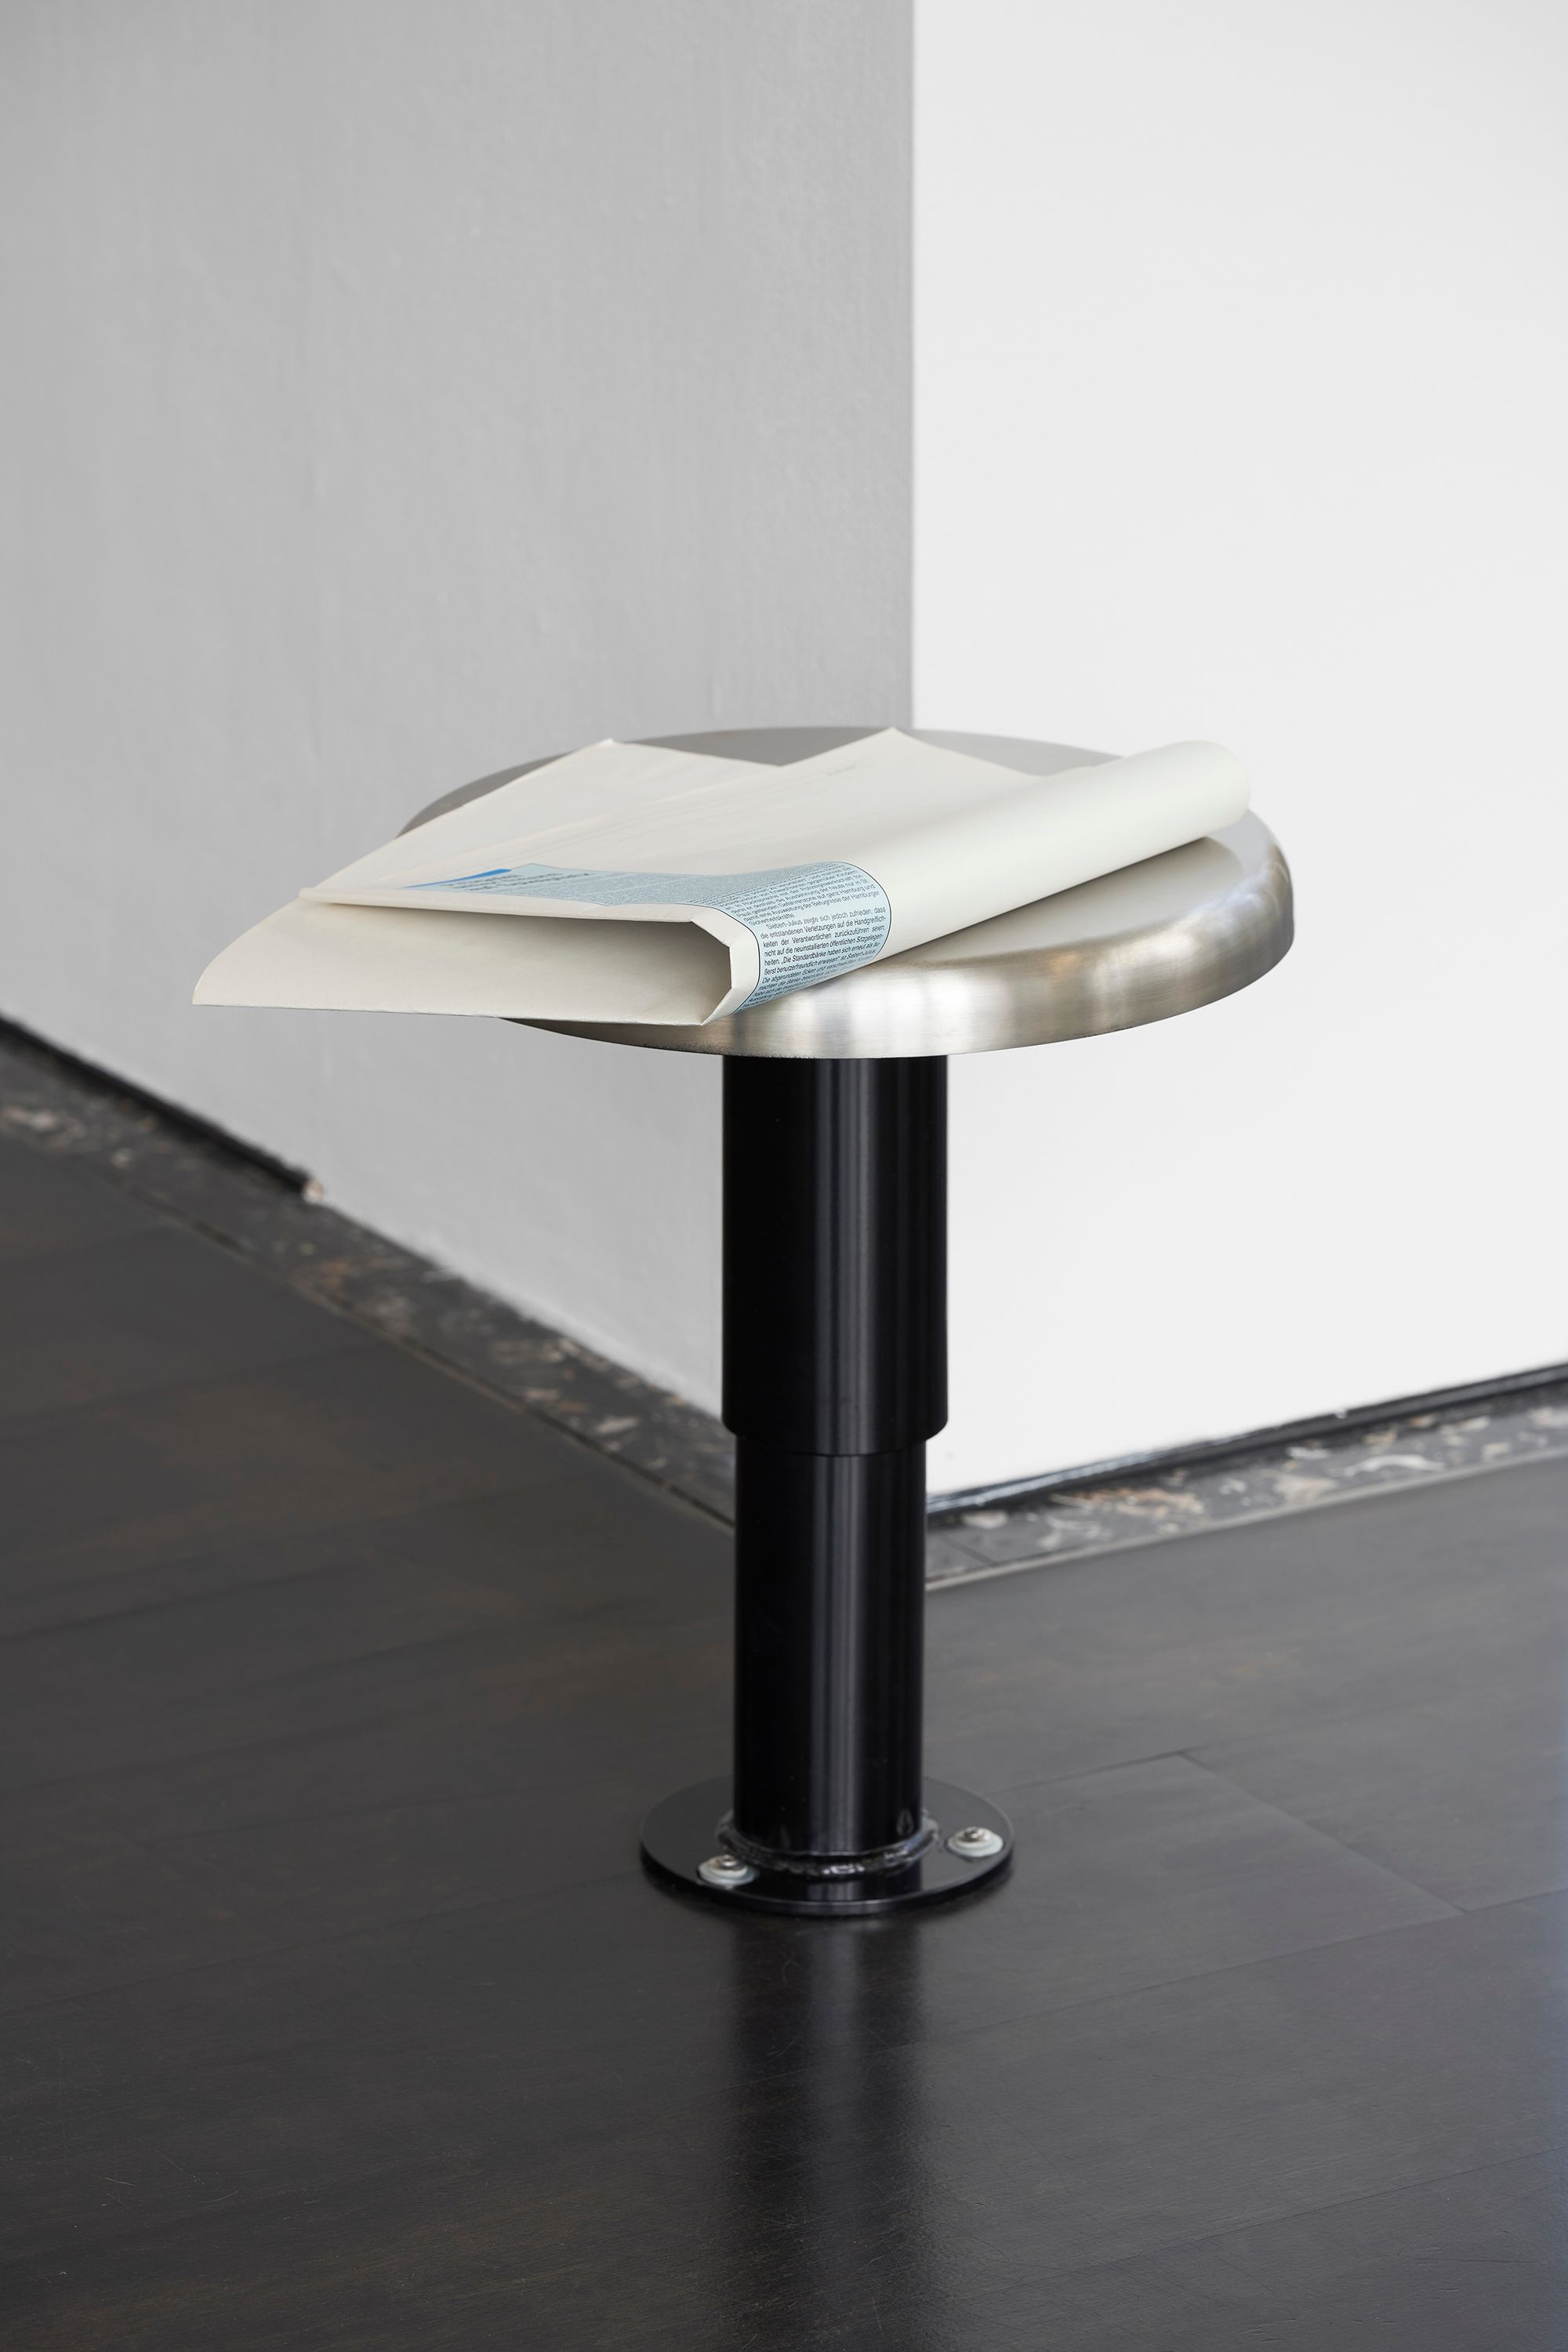 Sung Tieu, Untitled (In Cold Print), 2020, Floor mounted stainless steel stool, 47.5 ⁠× ⁠51 ⁠× ⁠36 ⁠⁠cm